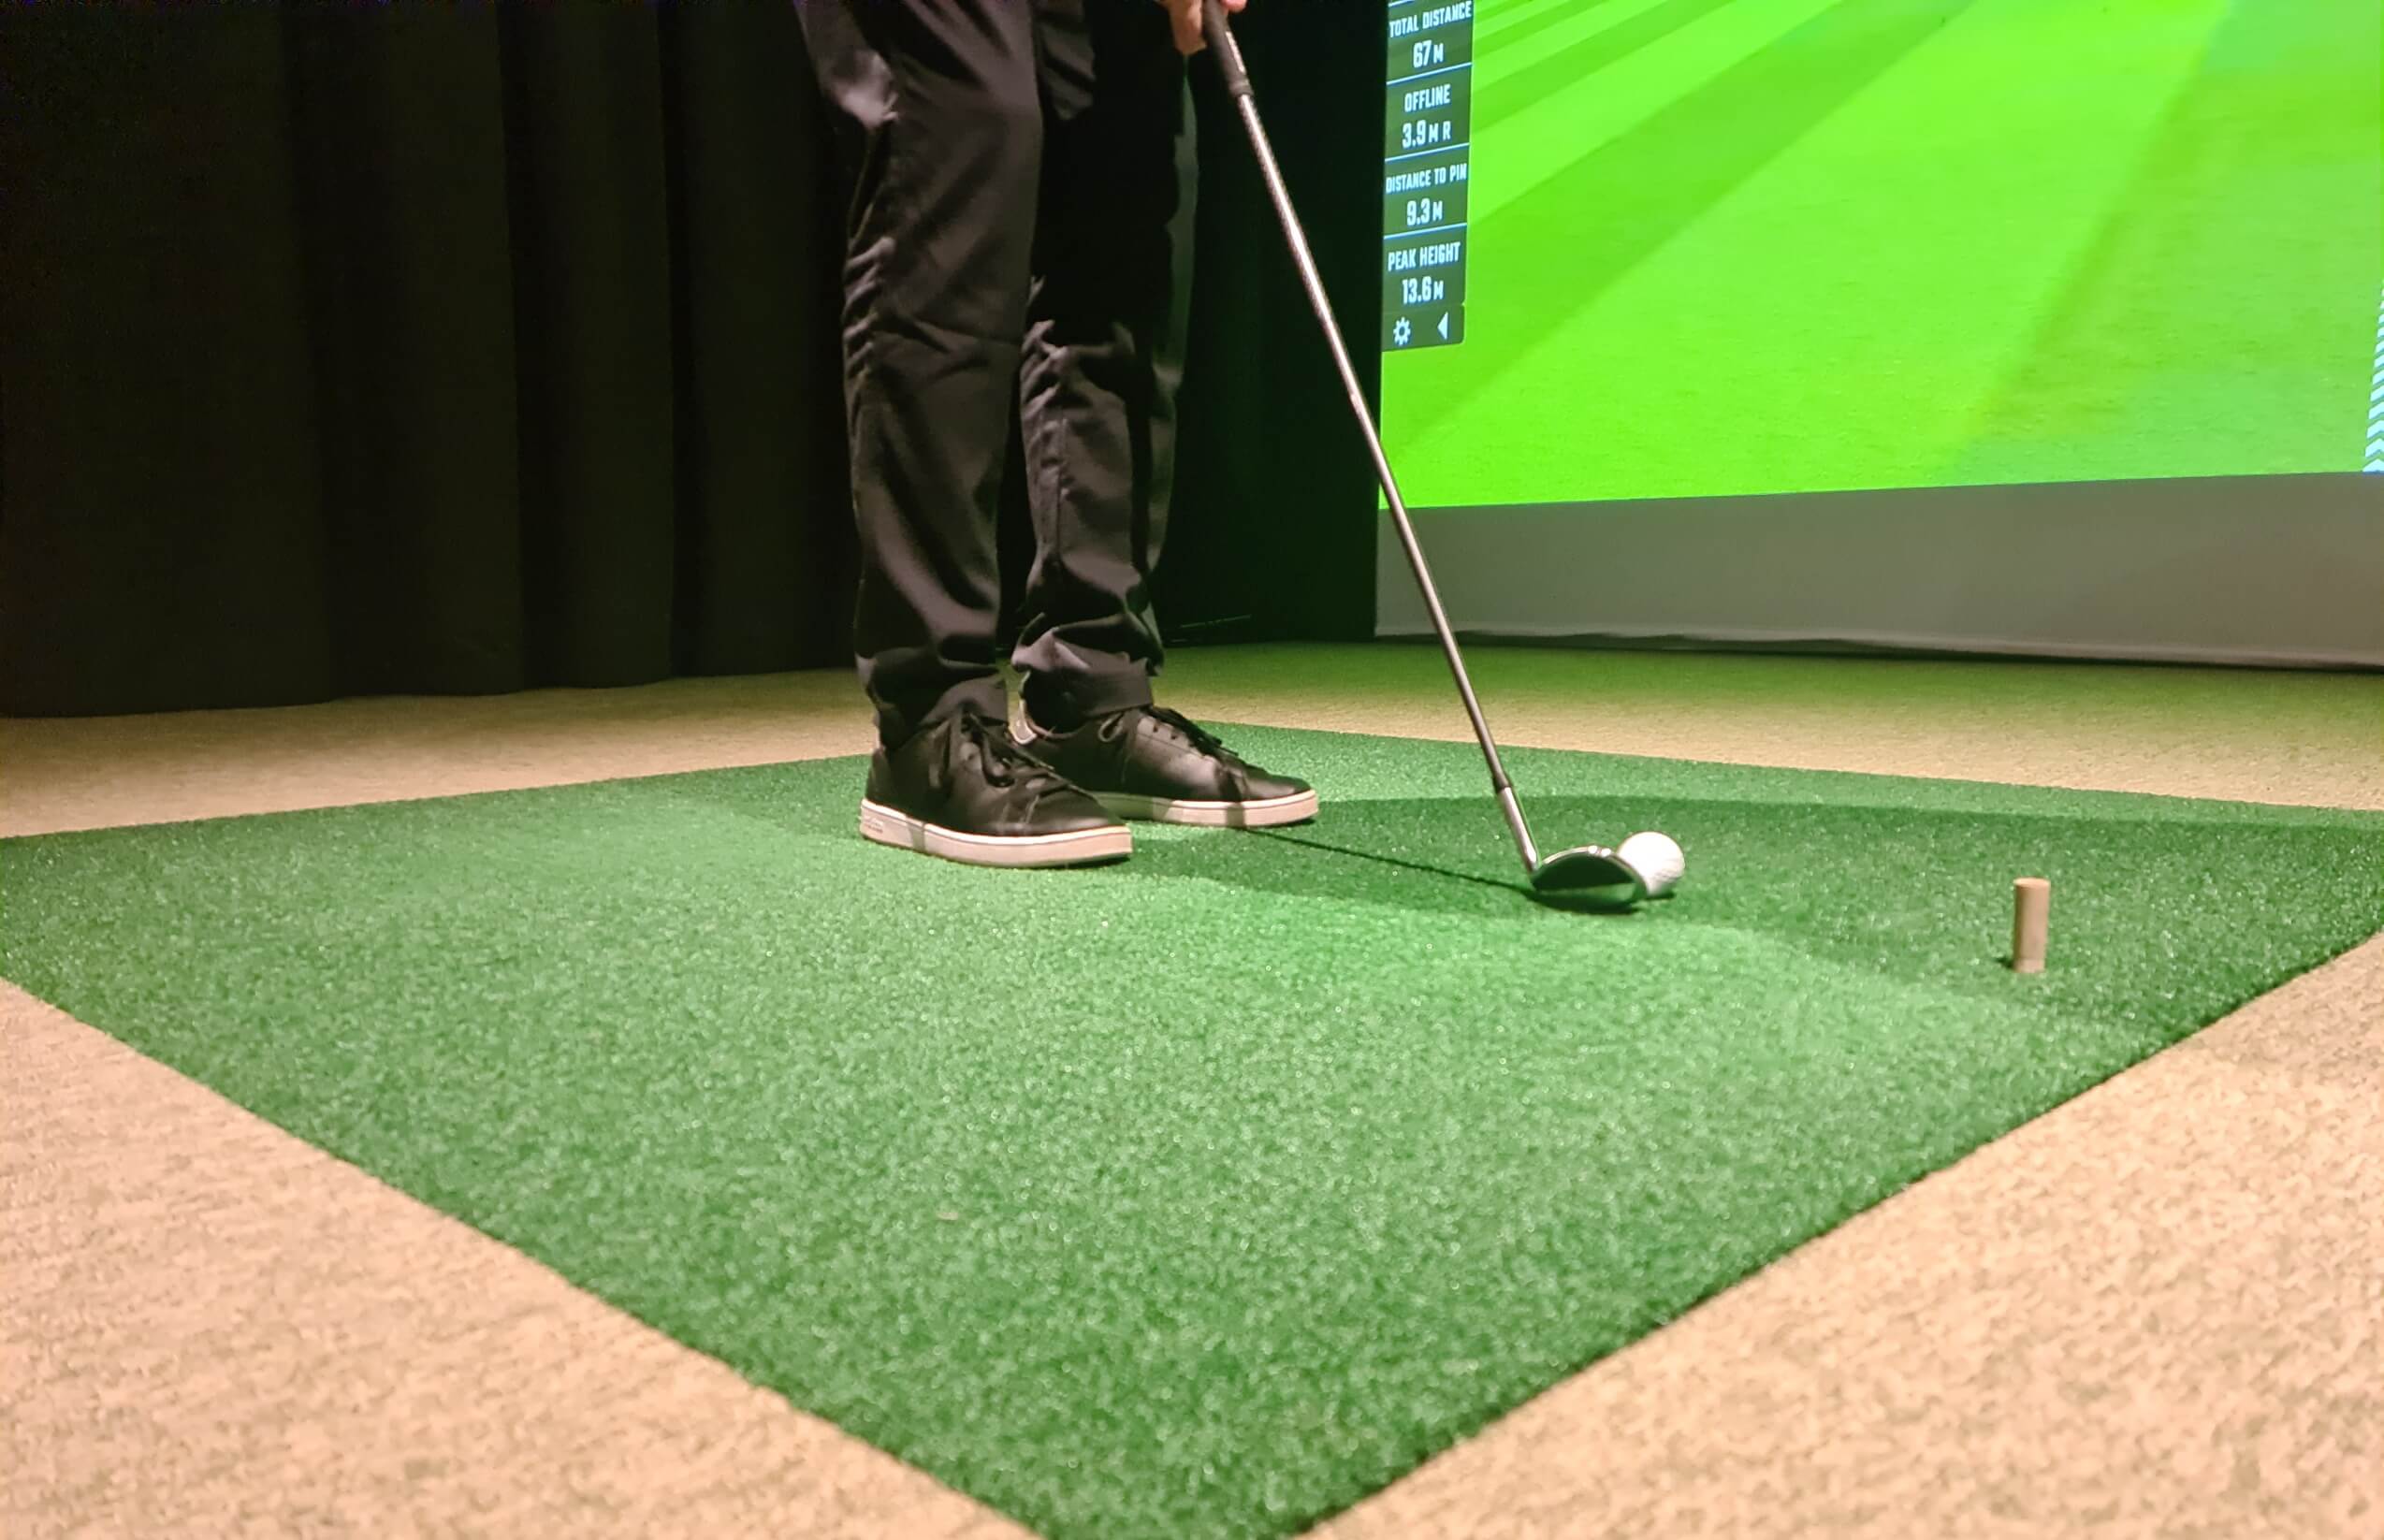 10 Simple Tips to Boost Your Golf Game on a Simulator